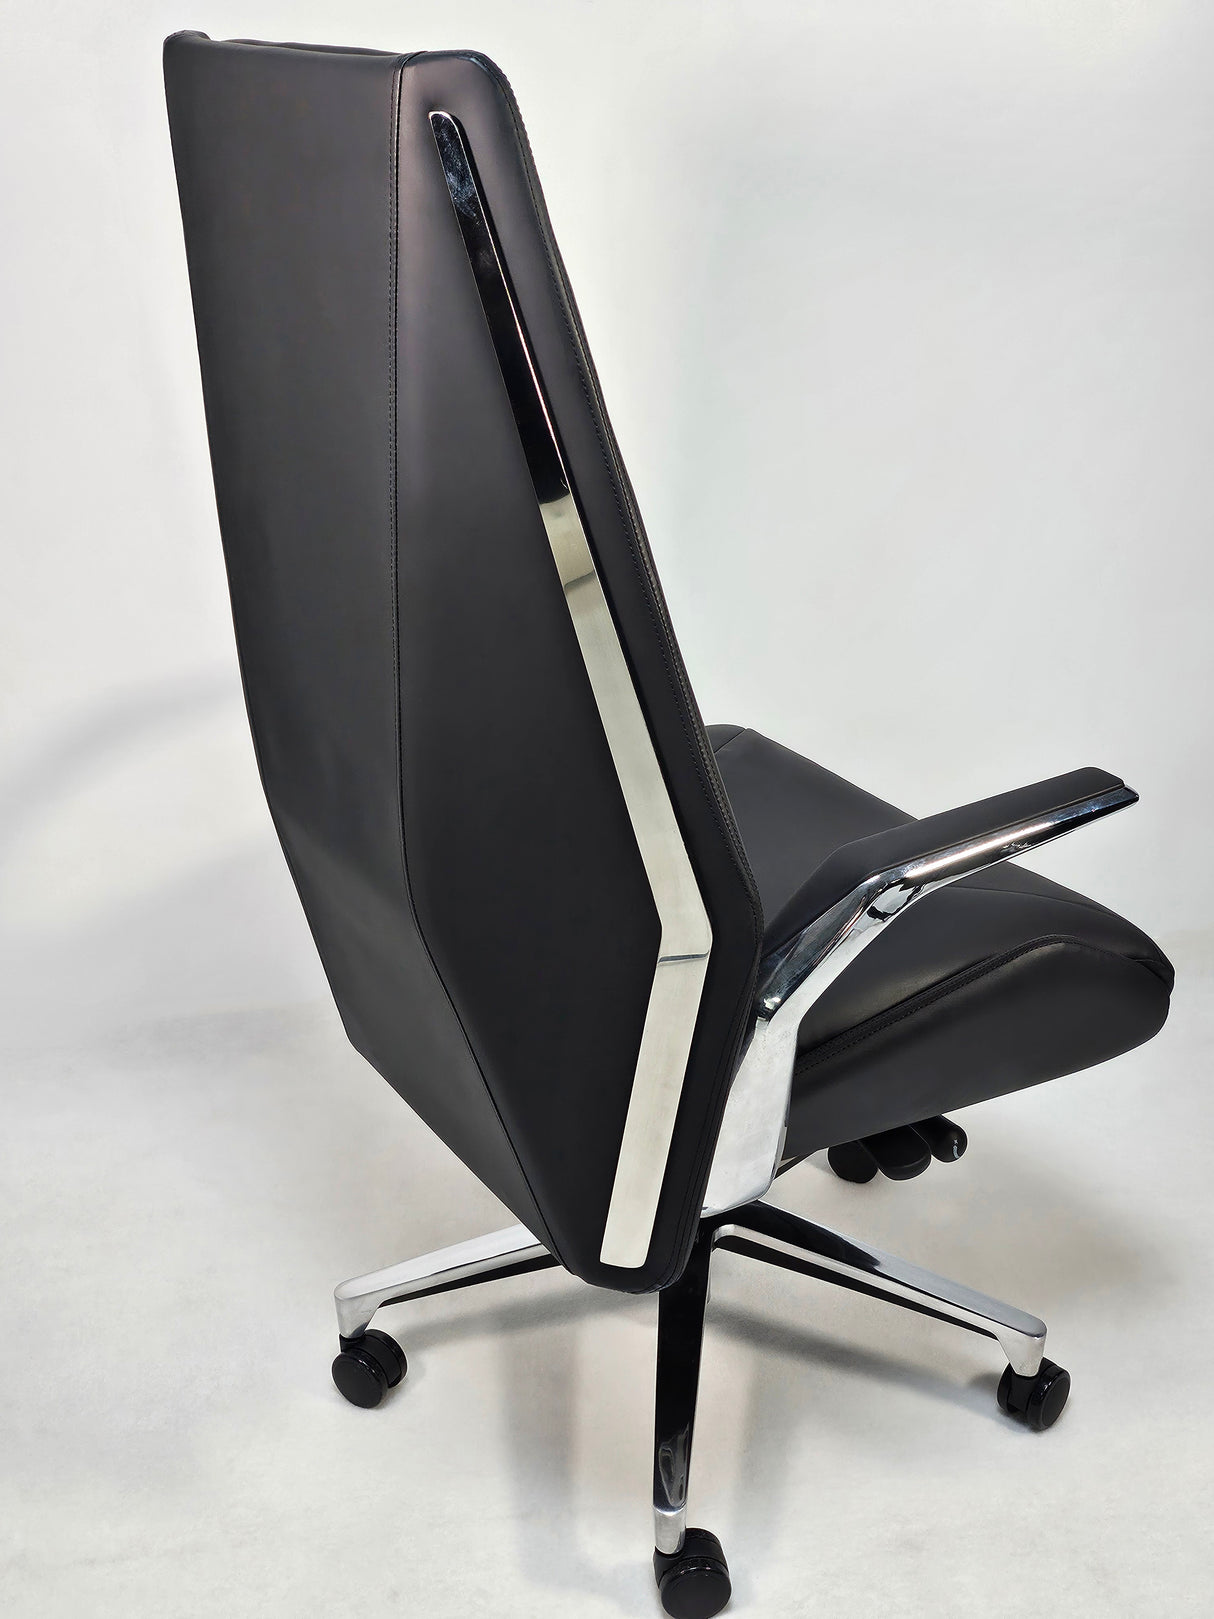 Quality Modern Heavy Duty Office Chair in Black Leather - DT-8530